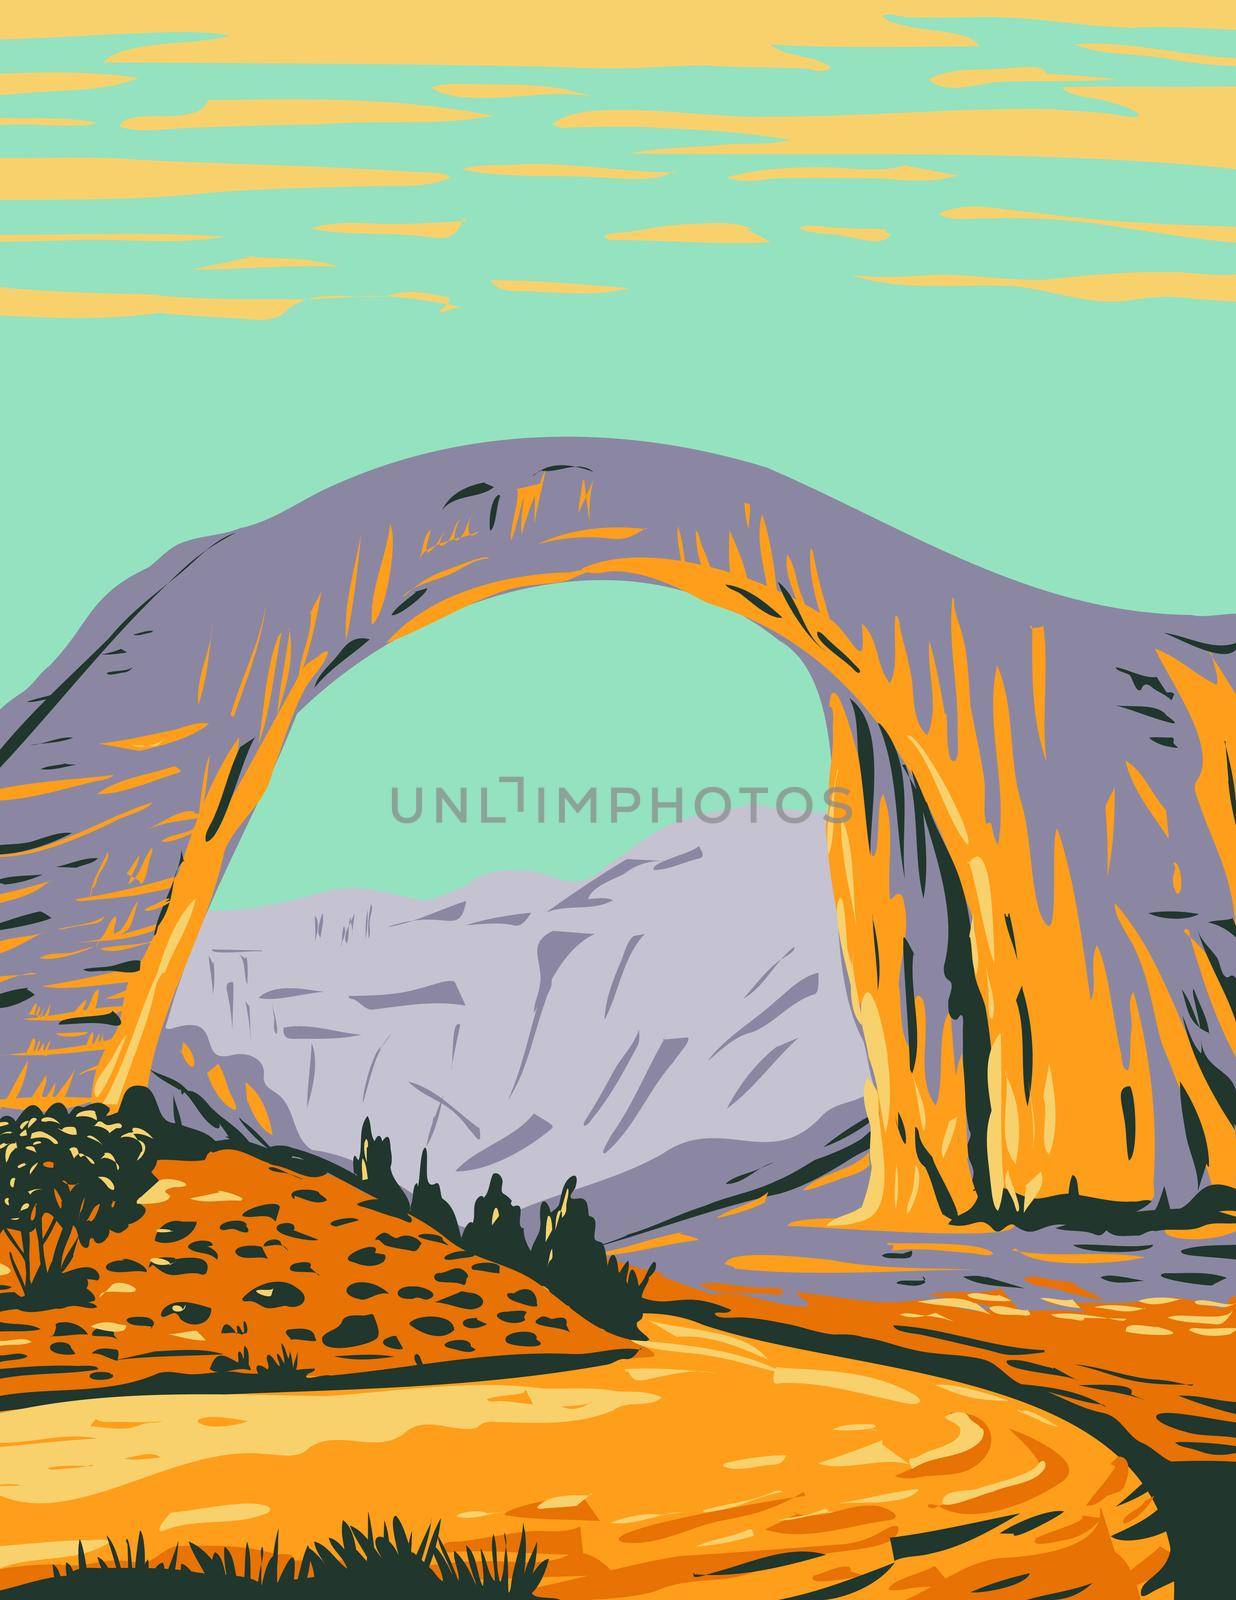 WPA Poster Art of Rainbow Bridge National Monument the world's highest natural bridge in southern Utah, United States done in works project administration style or federal art project style.